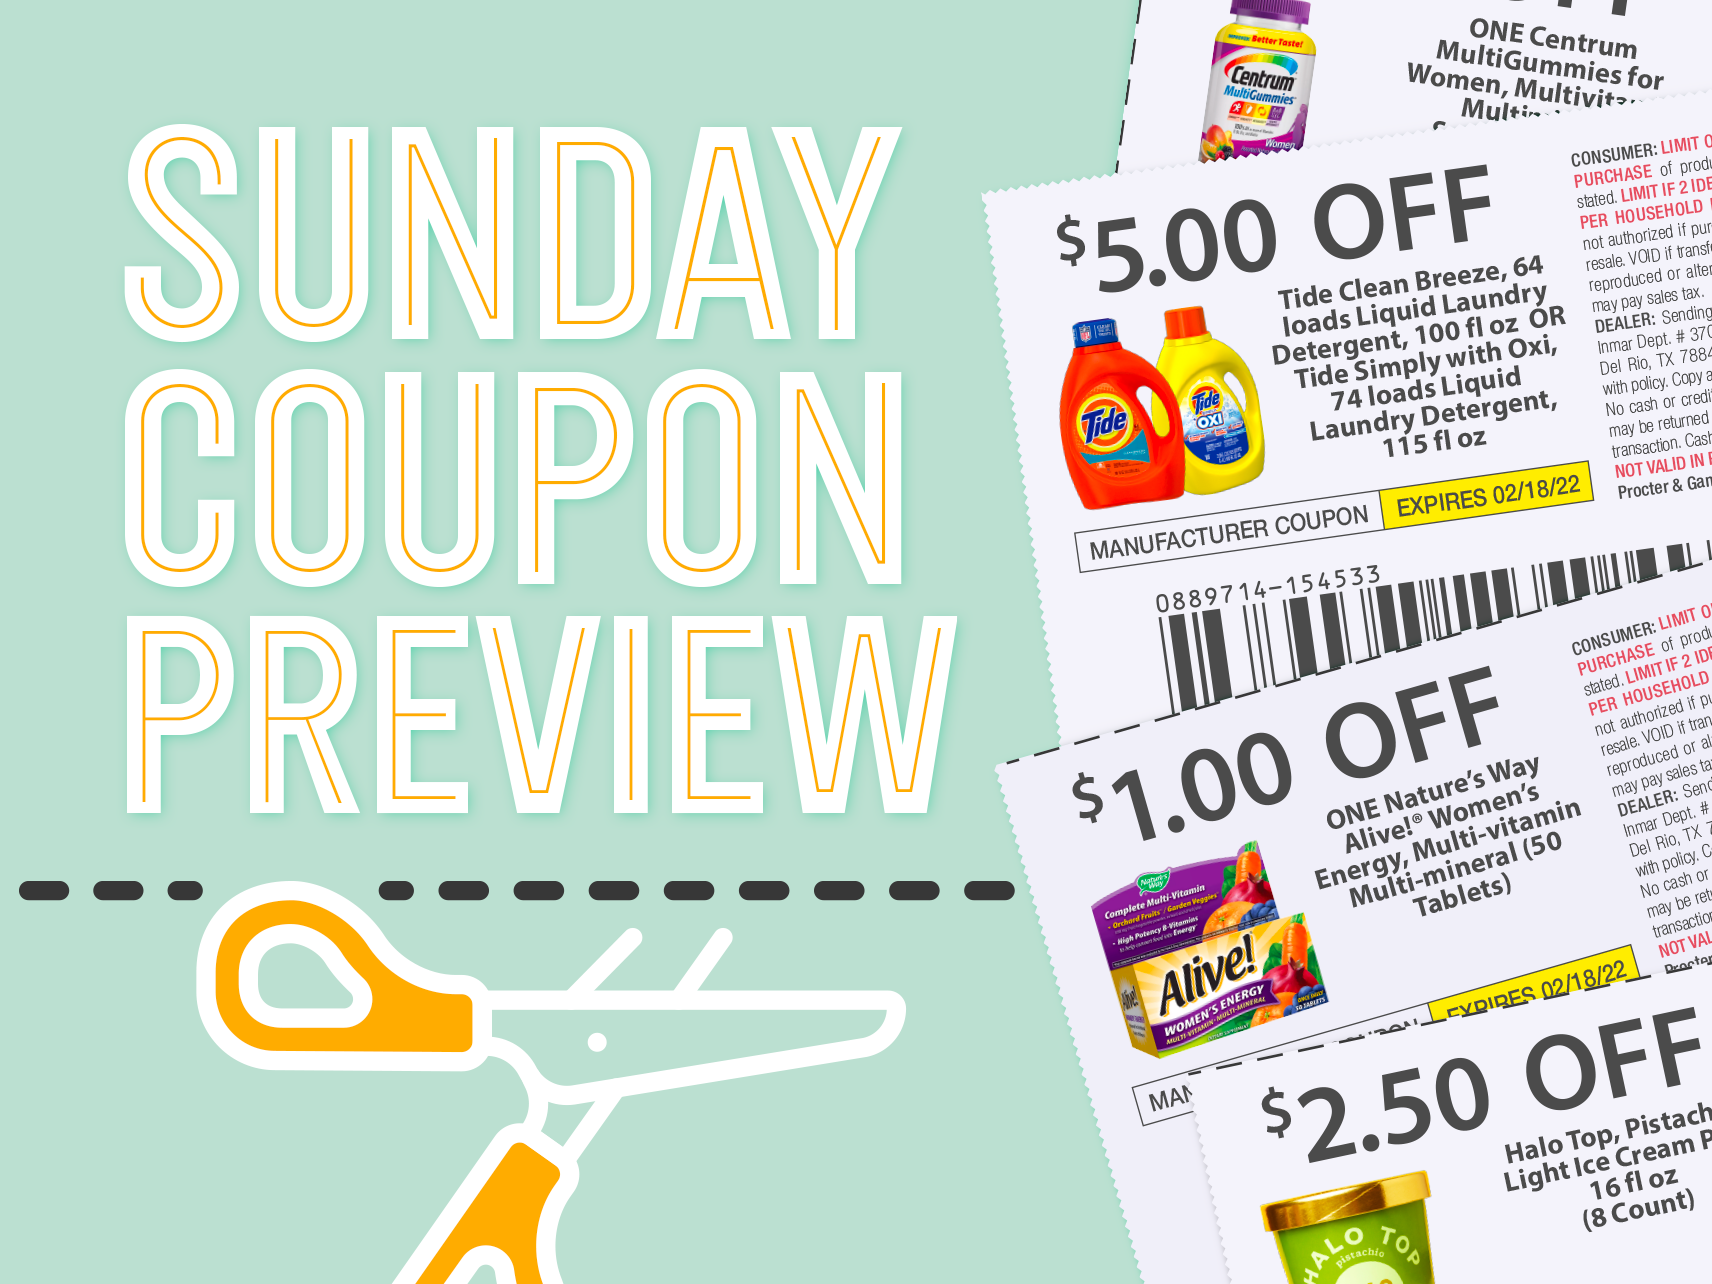 Sunday Coupon Preview For 6/19 – One Insert